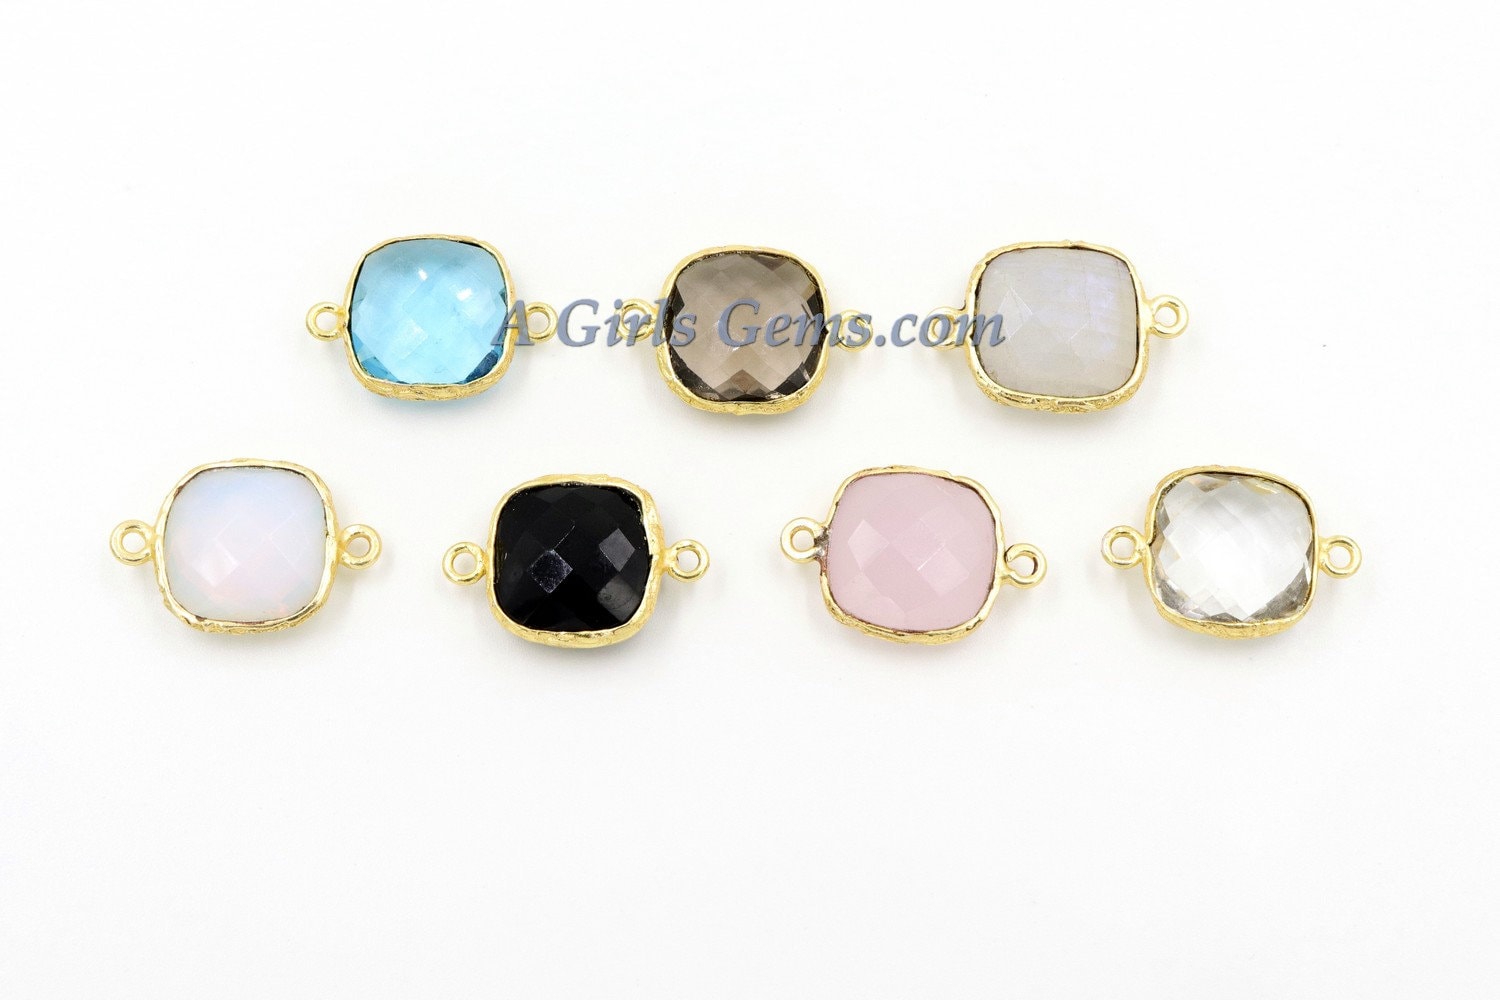 Square Gemstone Connectors, Gold Plated Silver Birthstone Stations